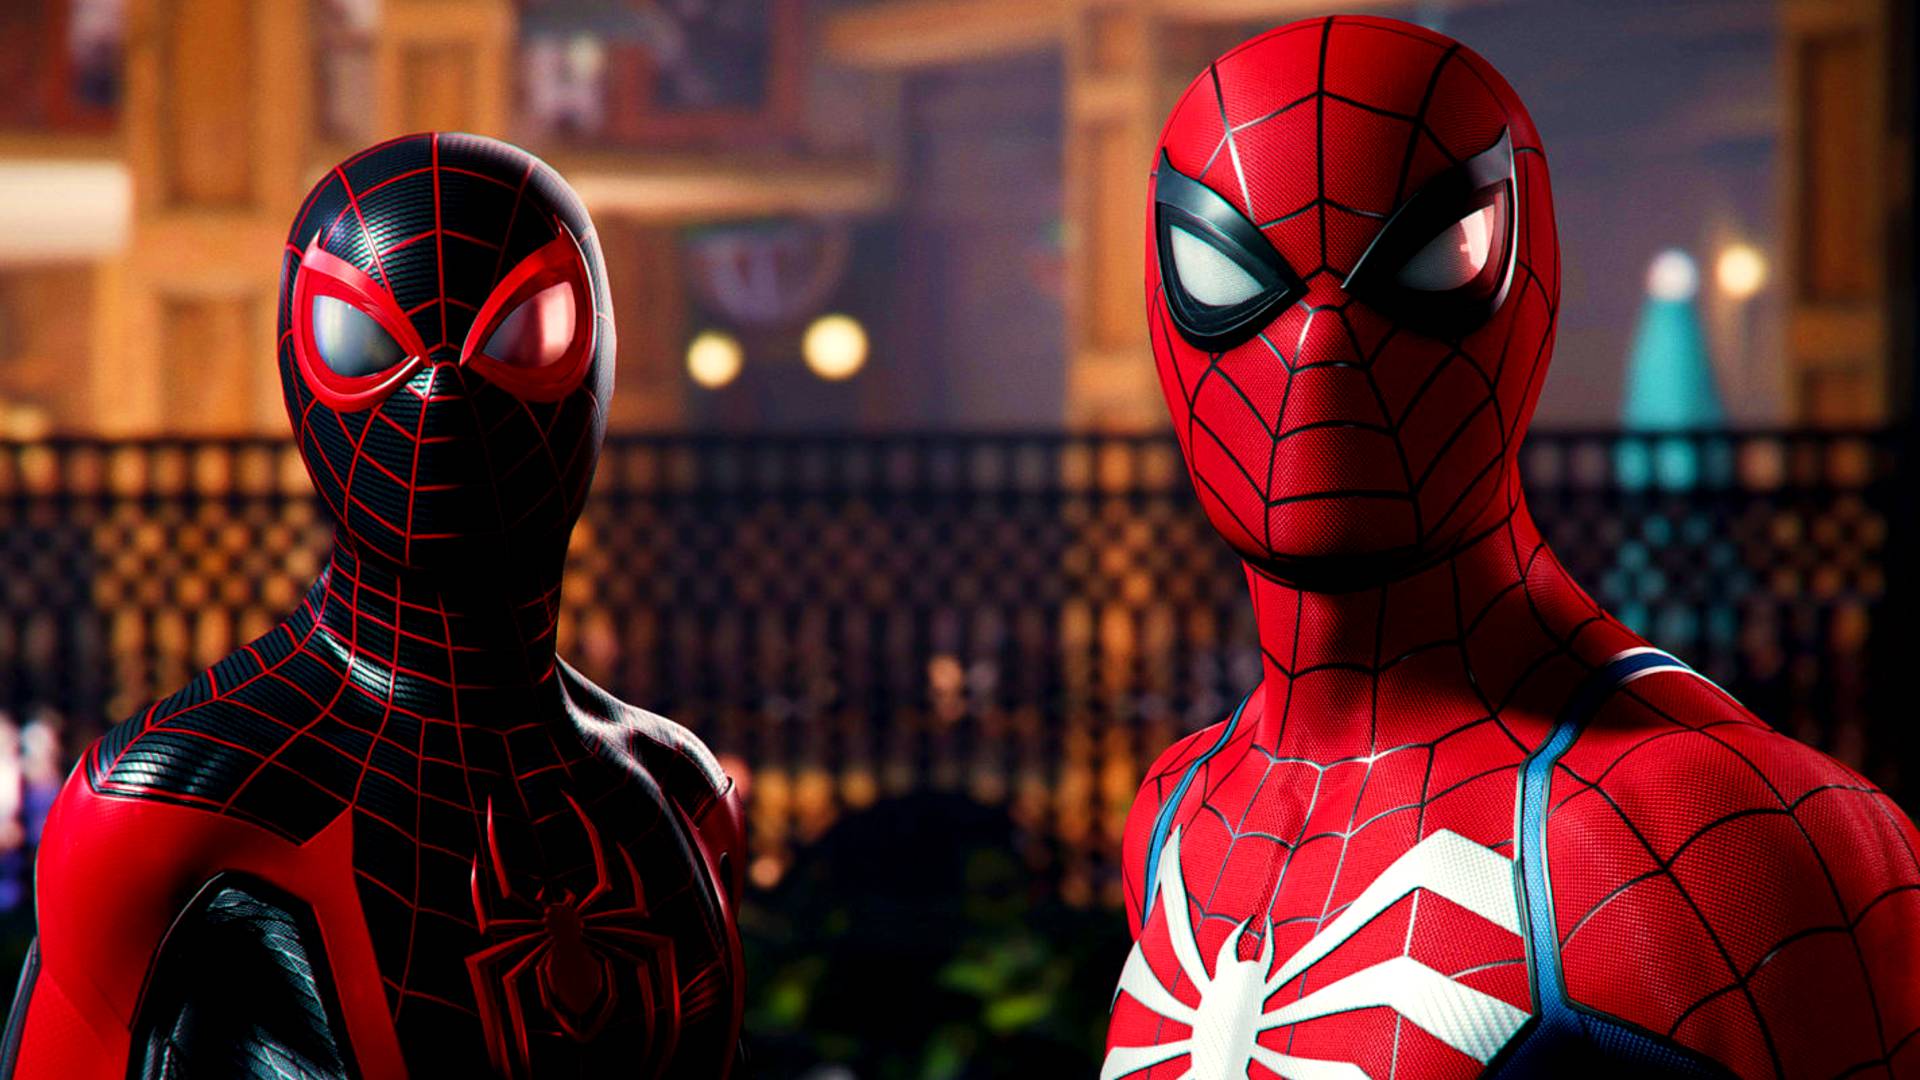 Marvel’s SpiderMan 2 release date rumours, trailers, and more The